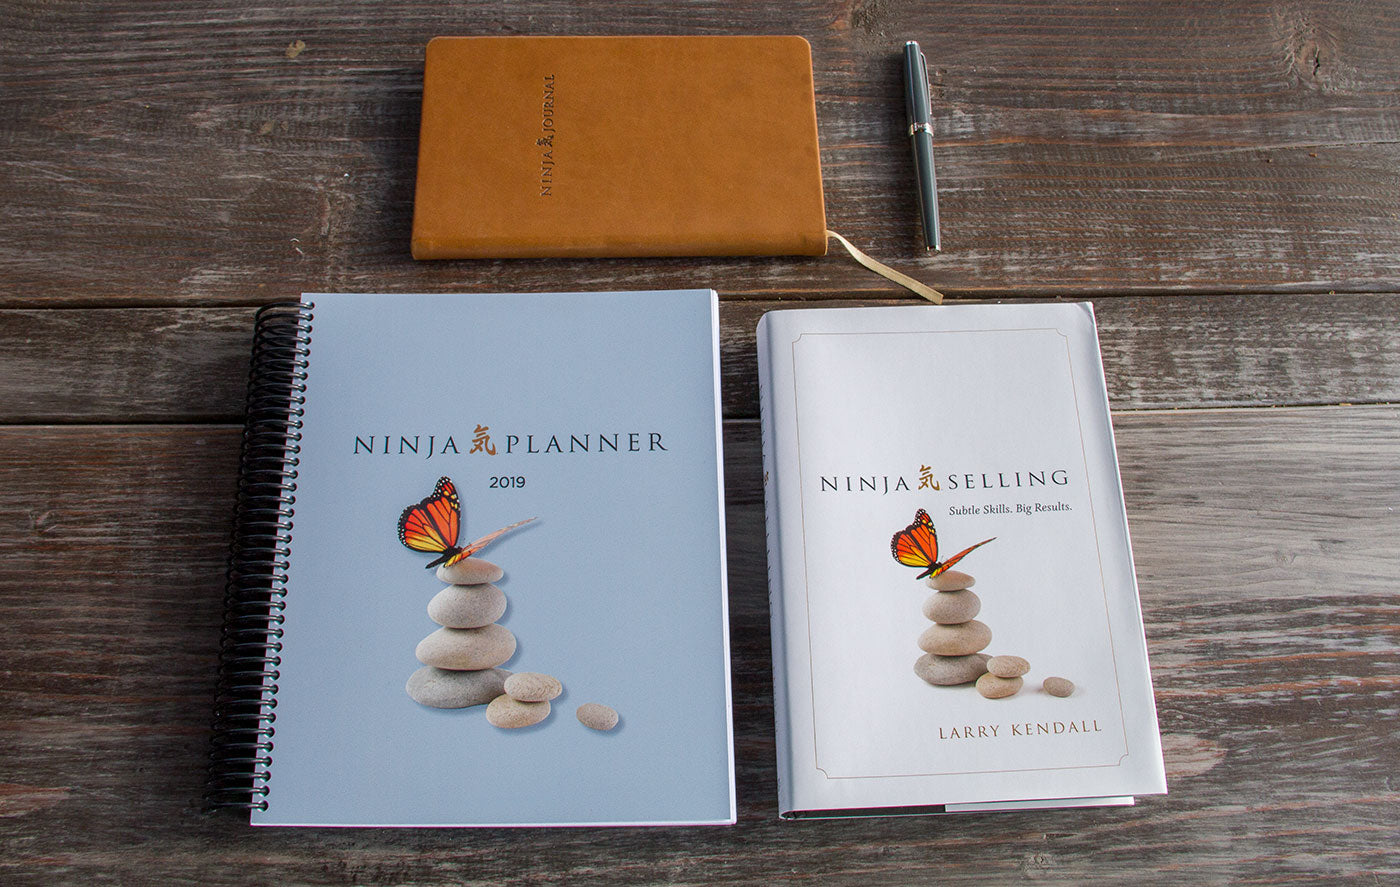 Ninja Planner Daily Actions. Big Results.